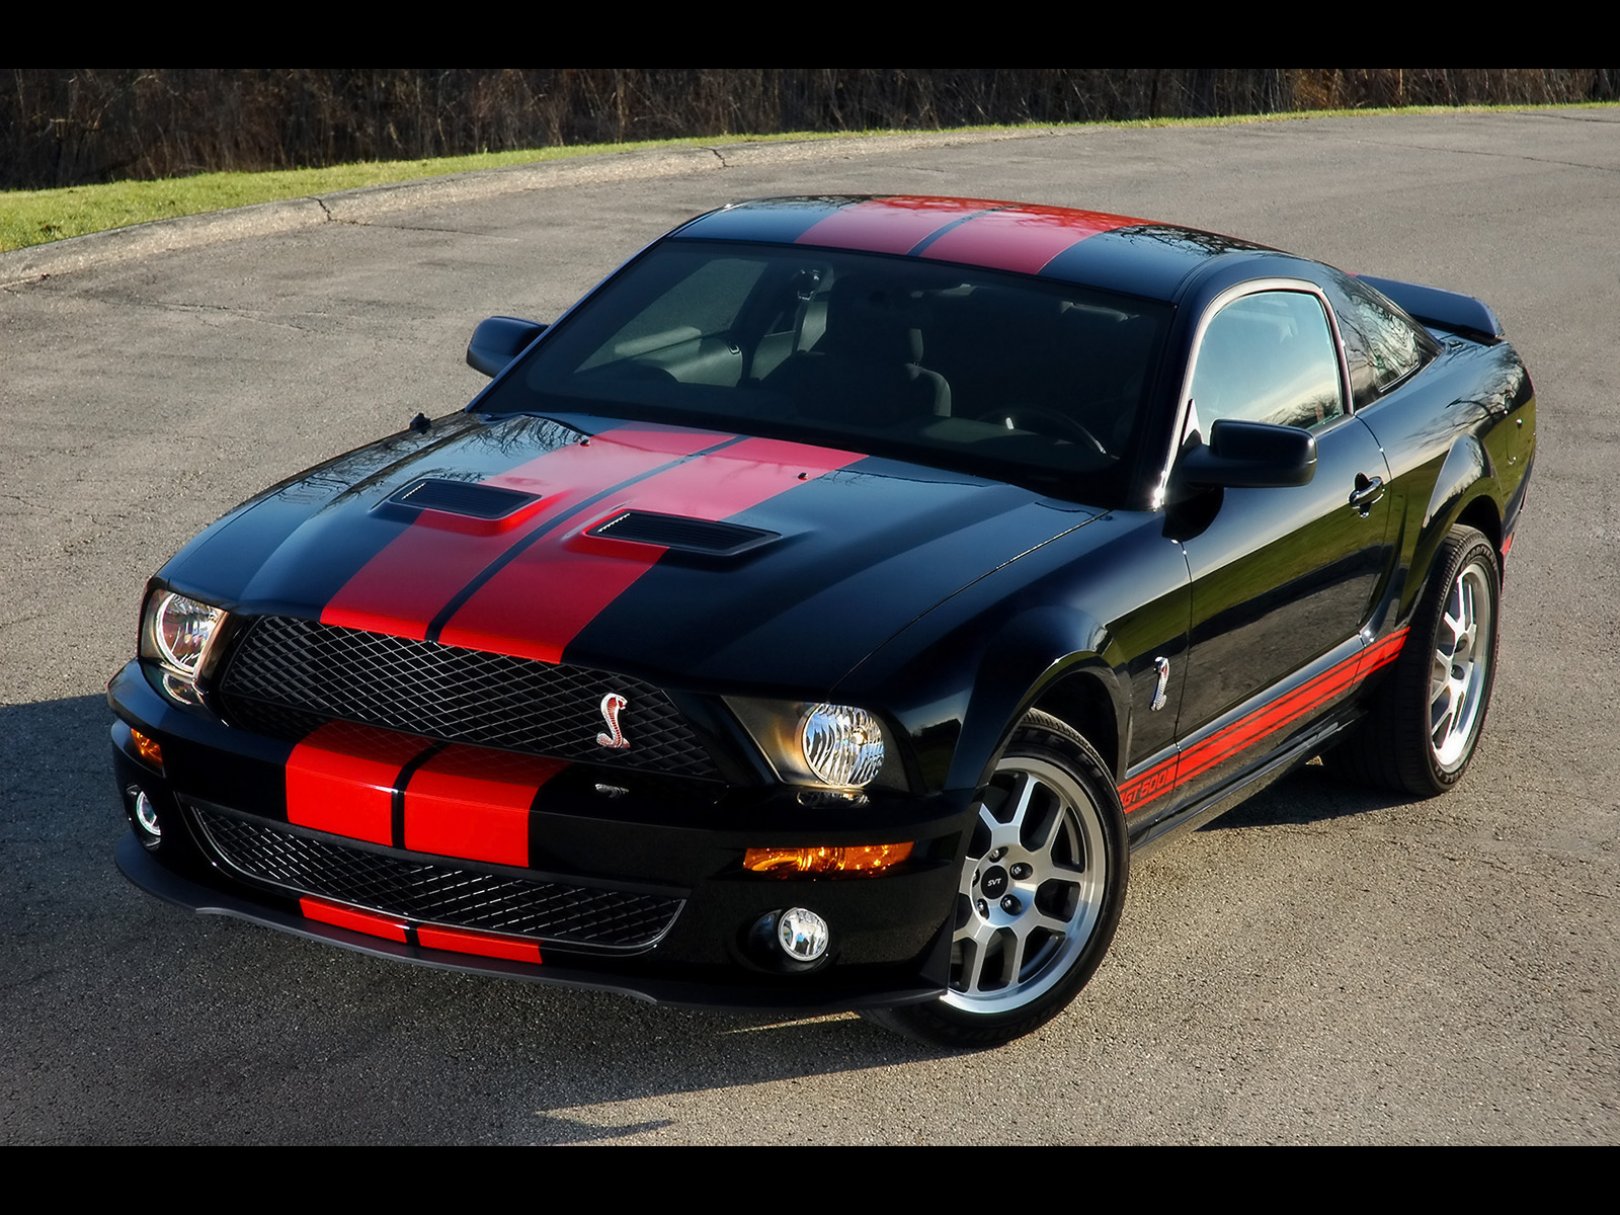 Foto: Ford Shelby GT500 Red Stripe Appearance Package Black Front Angle Top (2007)